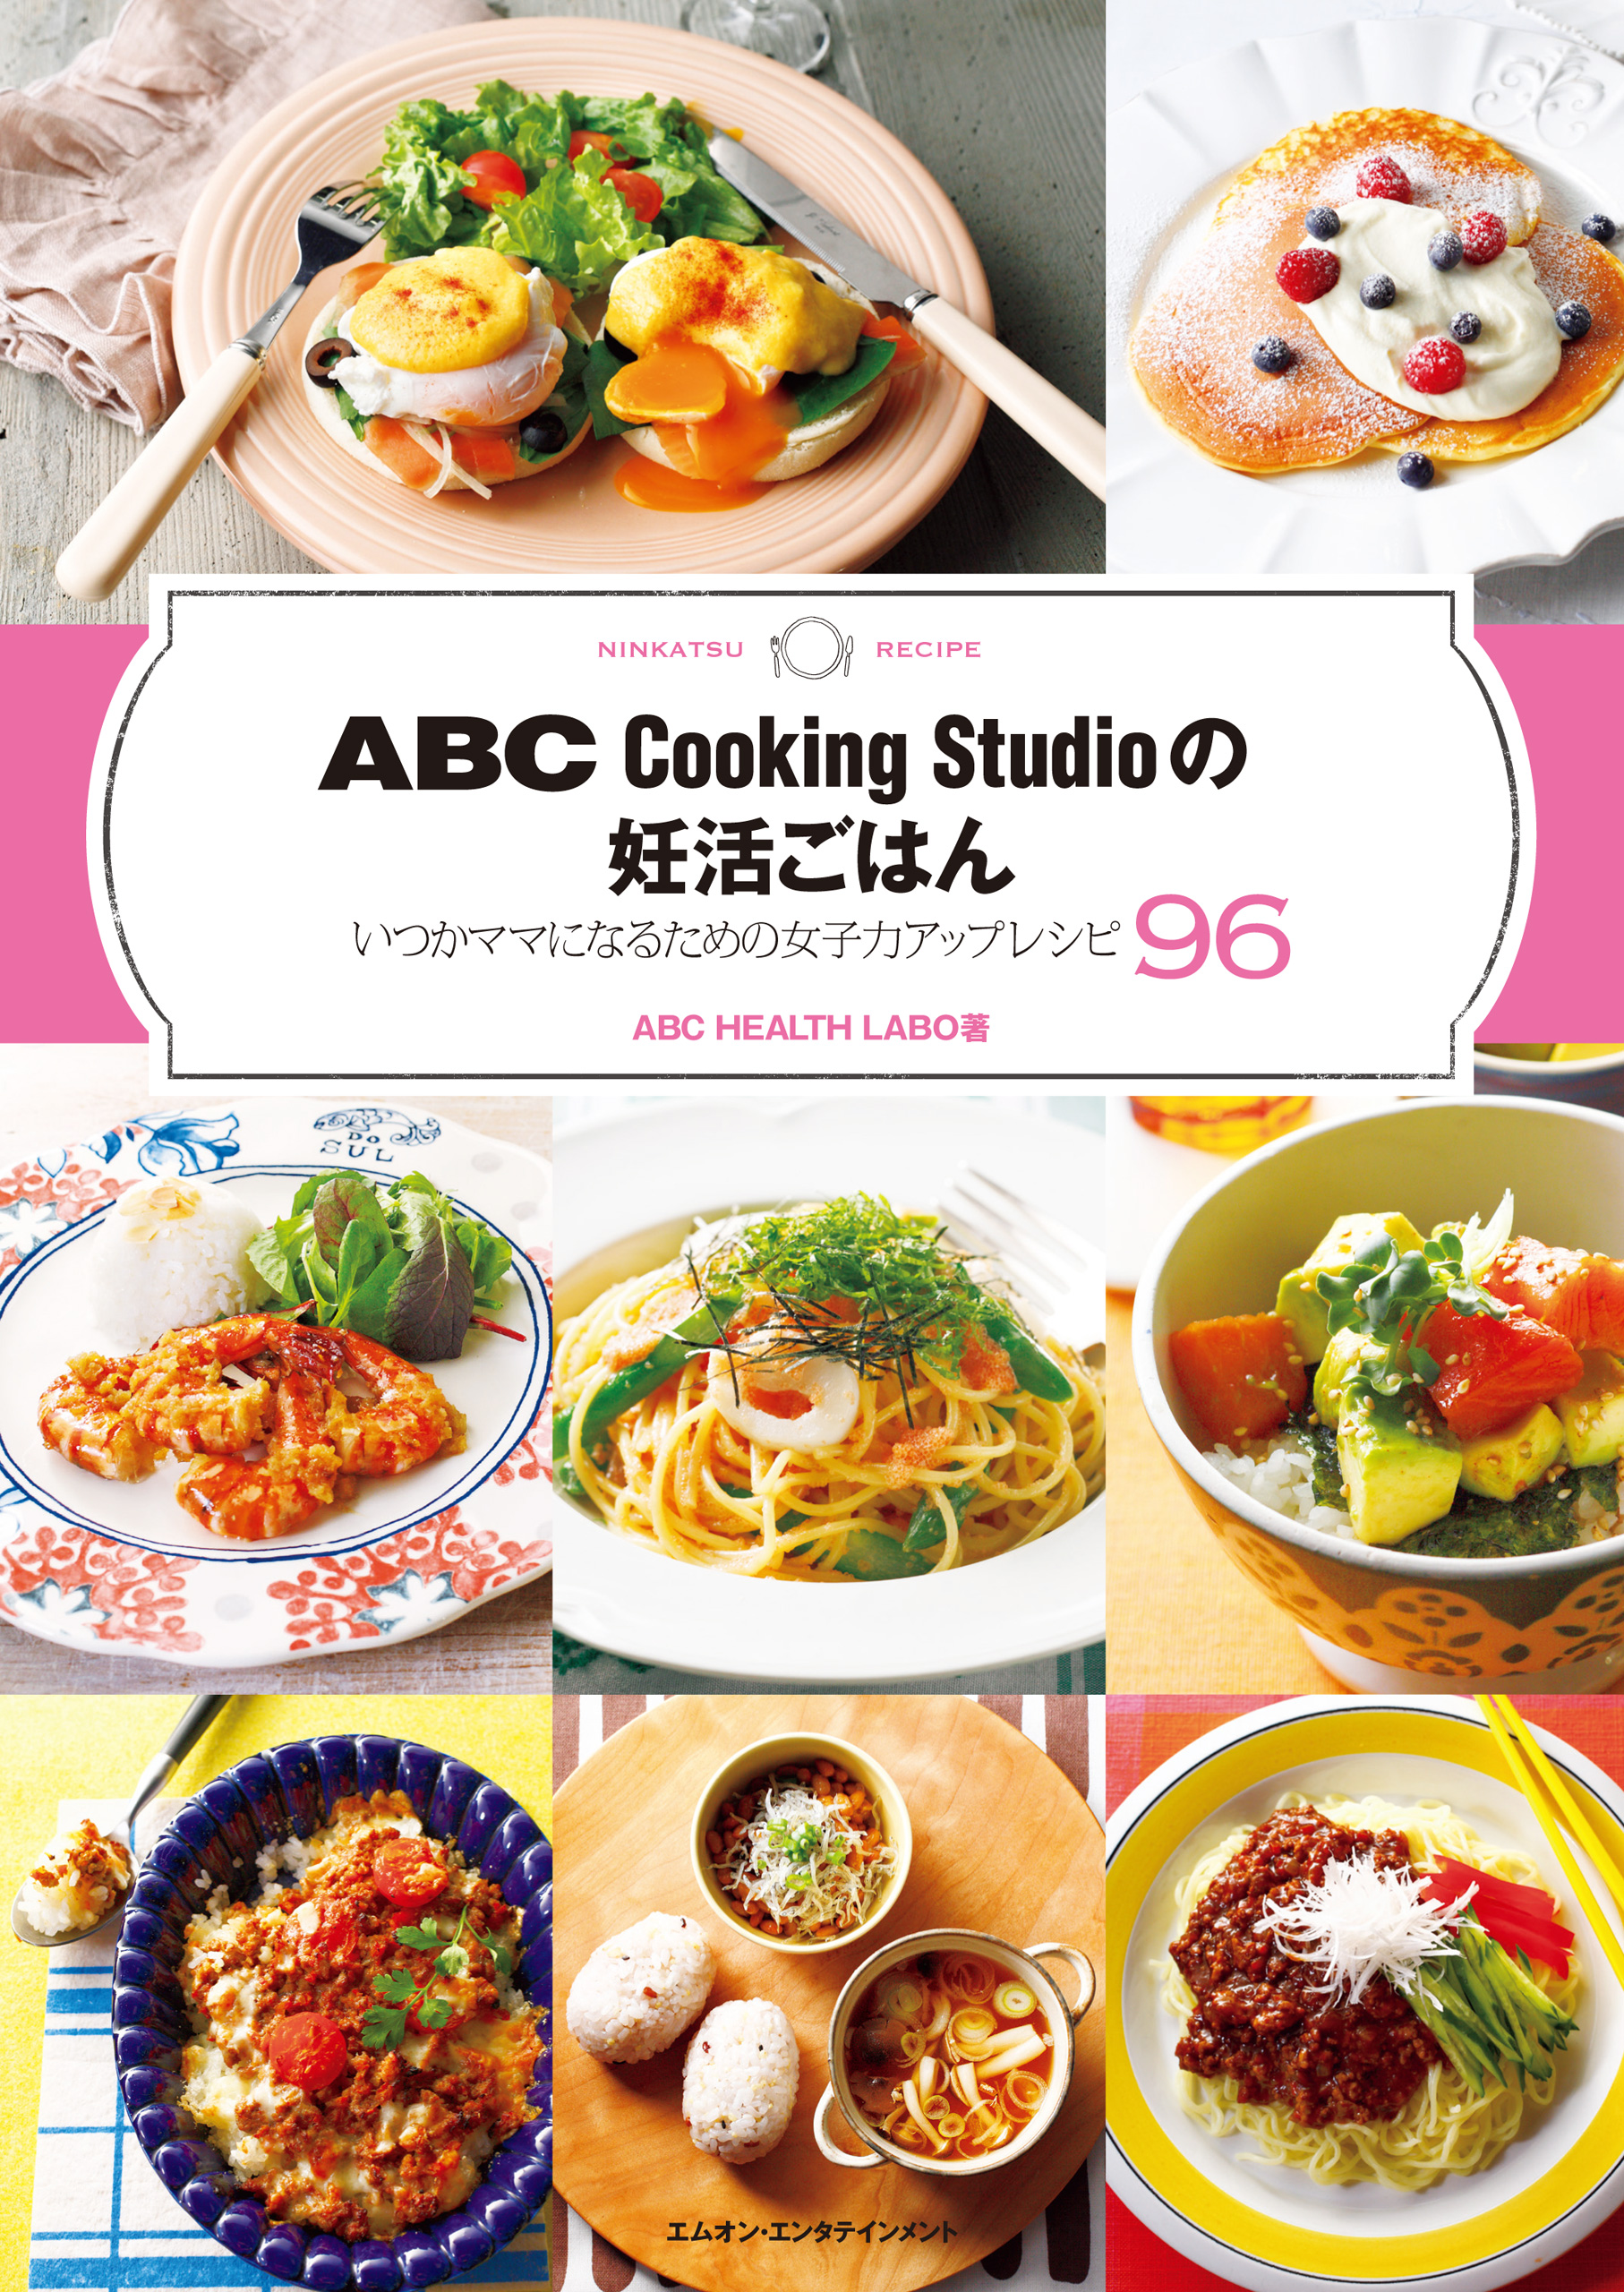 ABCクッキング レシピ 4点セット - まとめ売り